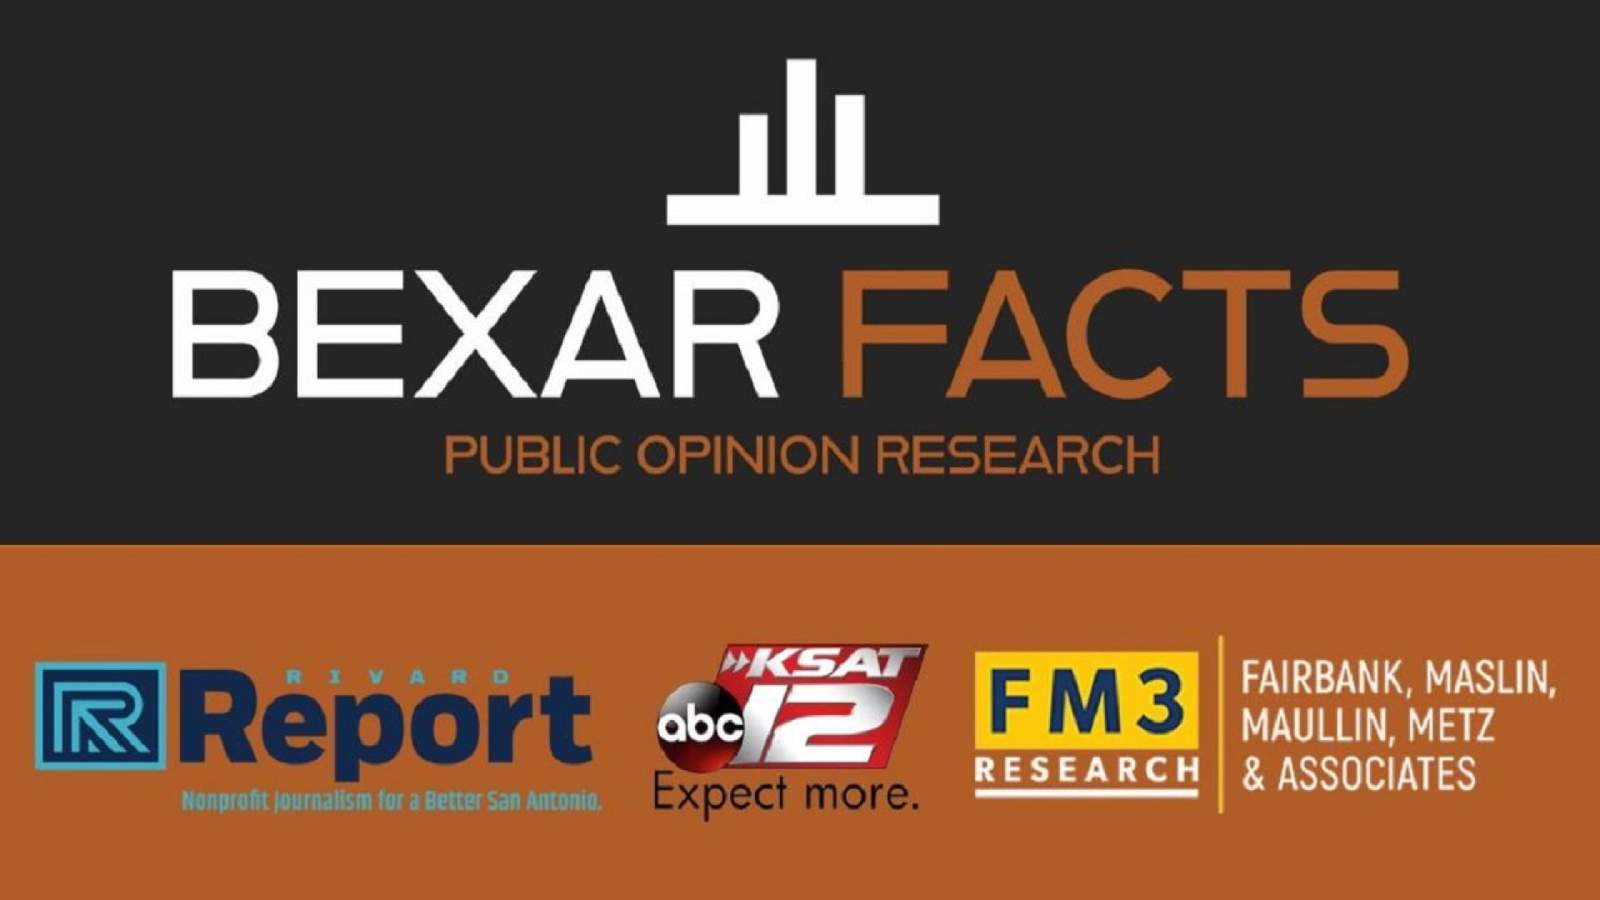 The People Speak: KSAT to reveal the Bexar Facts